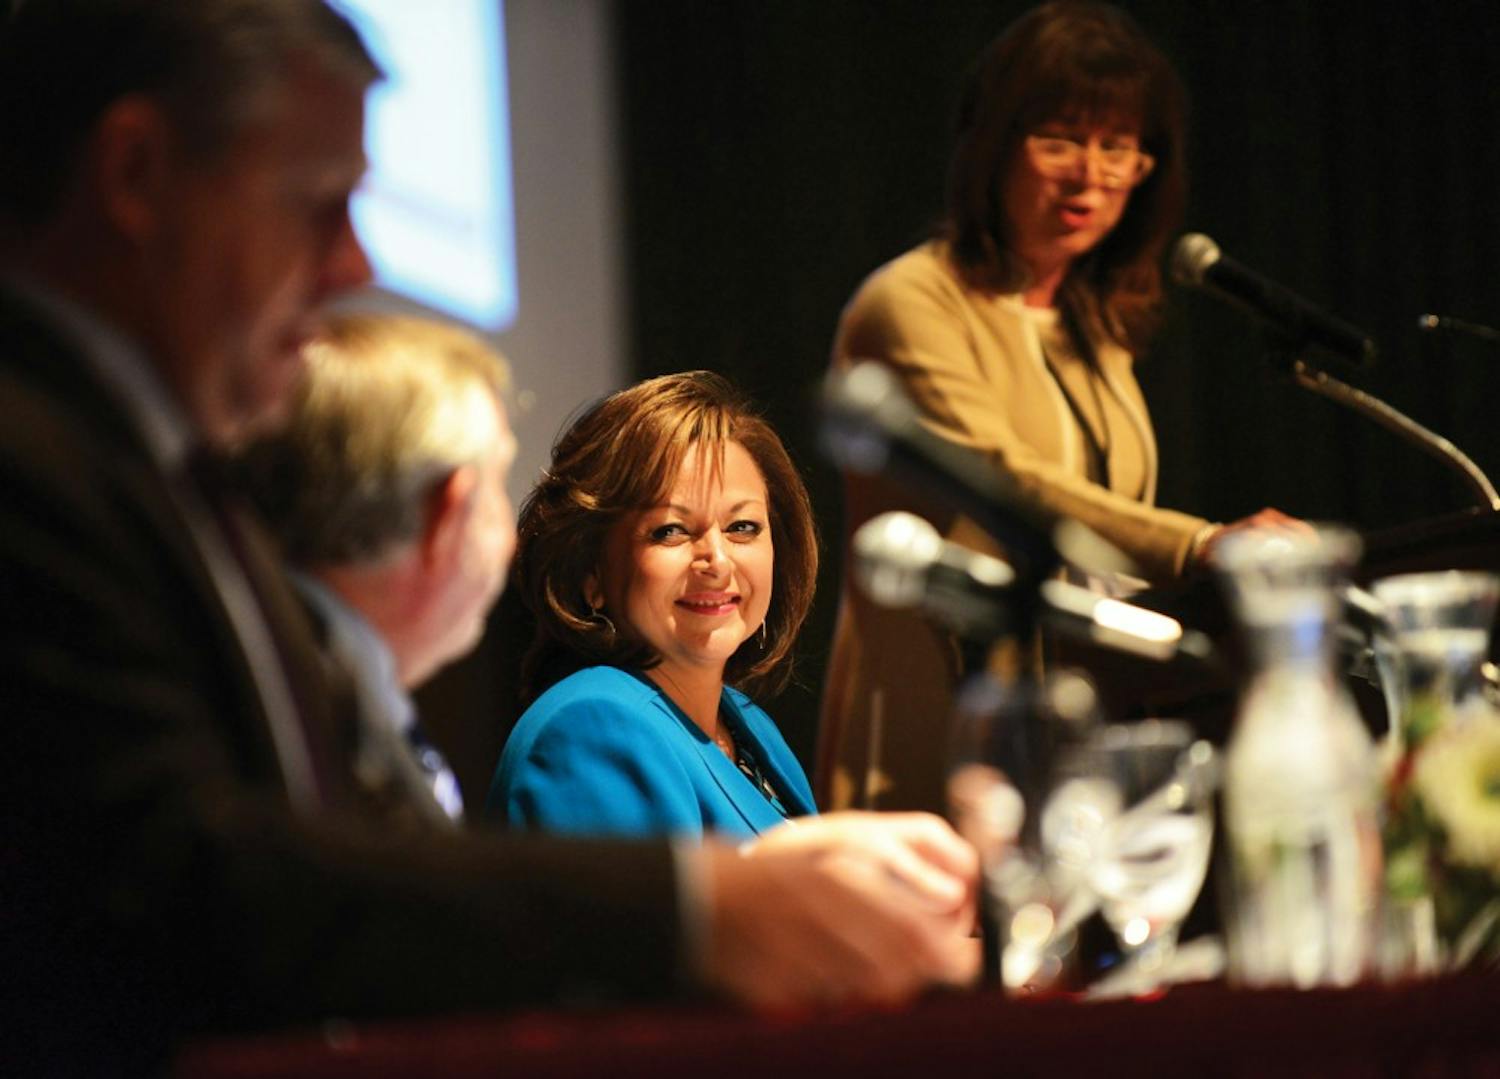 Gov. Susana Martinez looks at Wednesday’s panel of speakers during a conference held in the SUB. Martinez was the keynote speaker, addressing challenges the state of New Mexico faces with higher education.